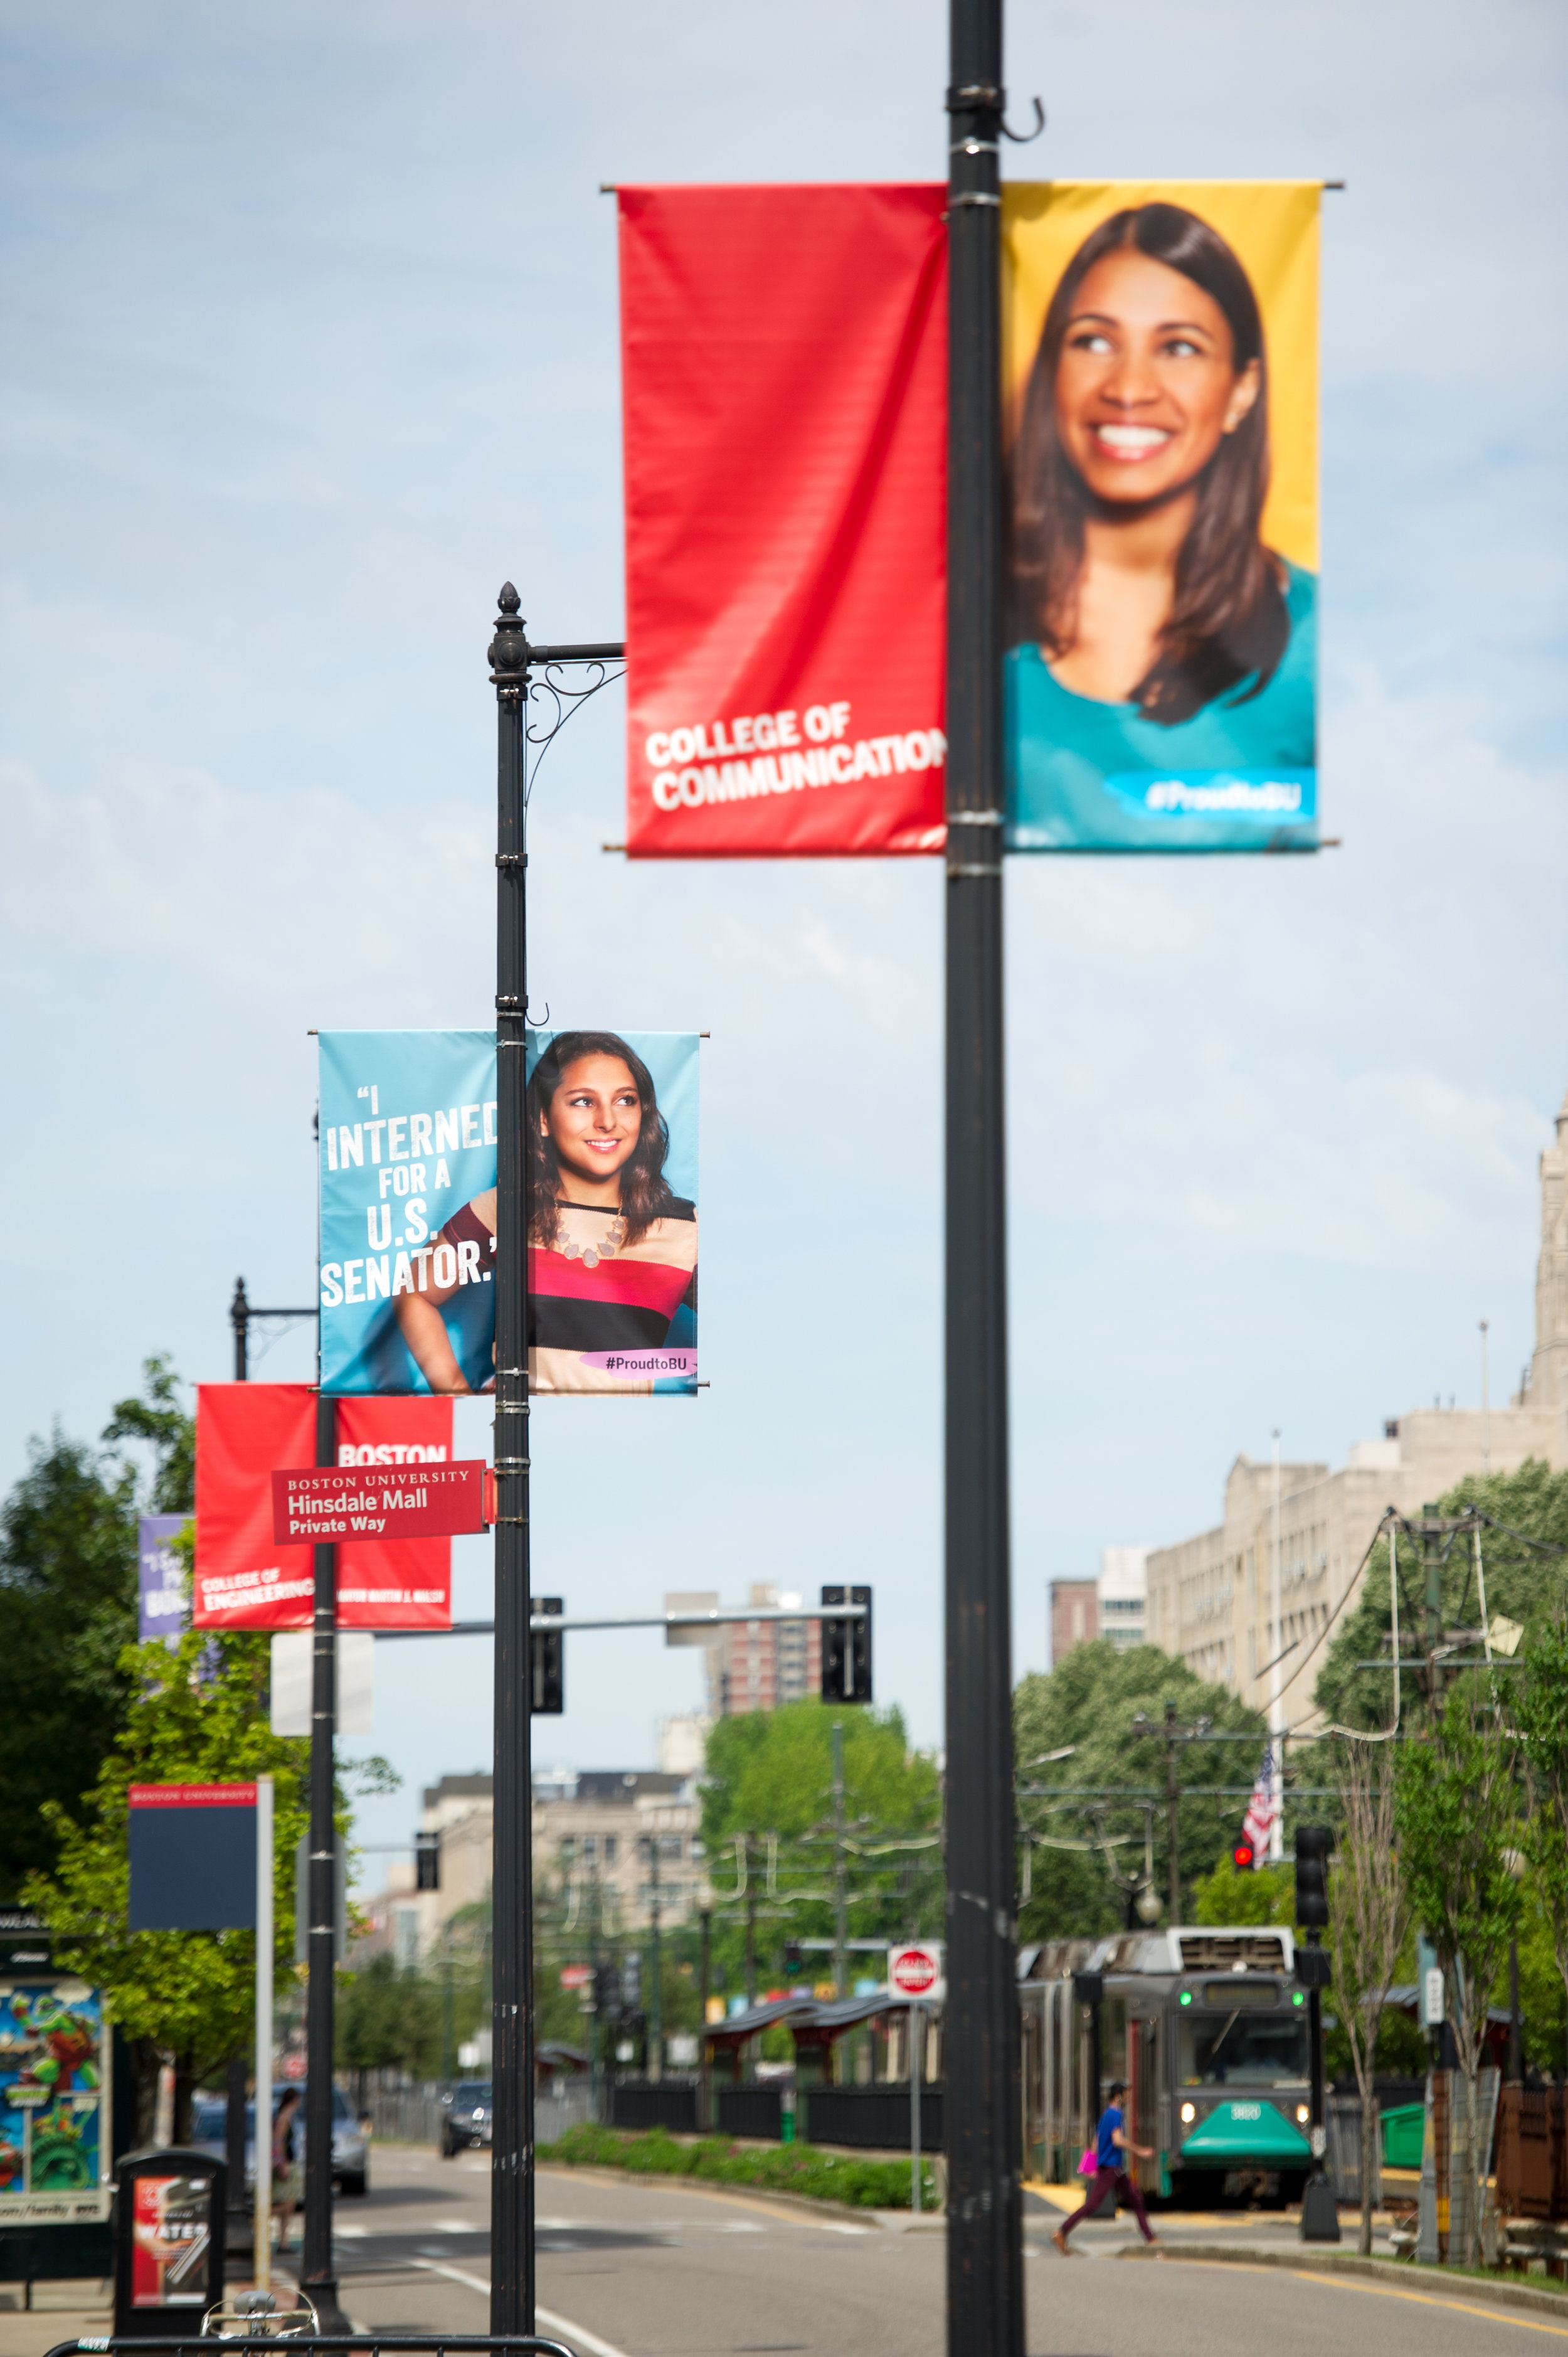  Banners along Commonwealth Avenue showcasing Boston University students and their accomplishments, also providing wayfinding and a way visually define the BU campus within its urban setting. Creative direction of student photoshoots and final design